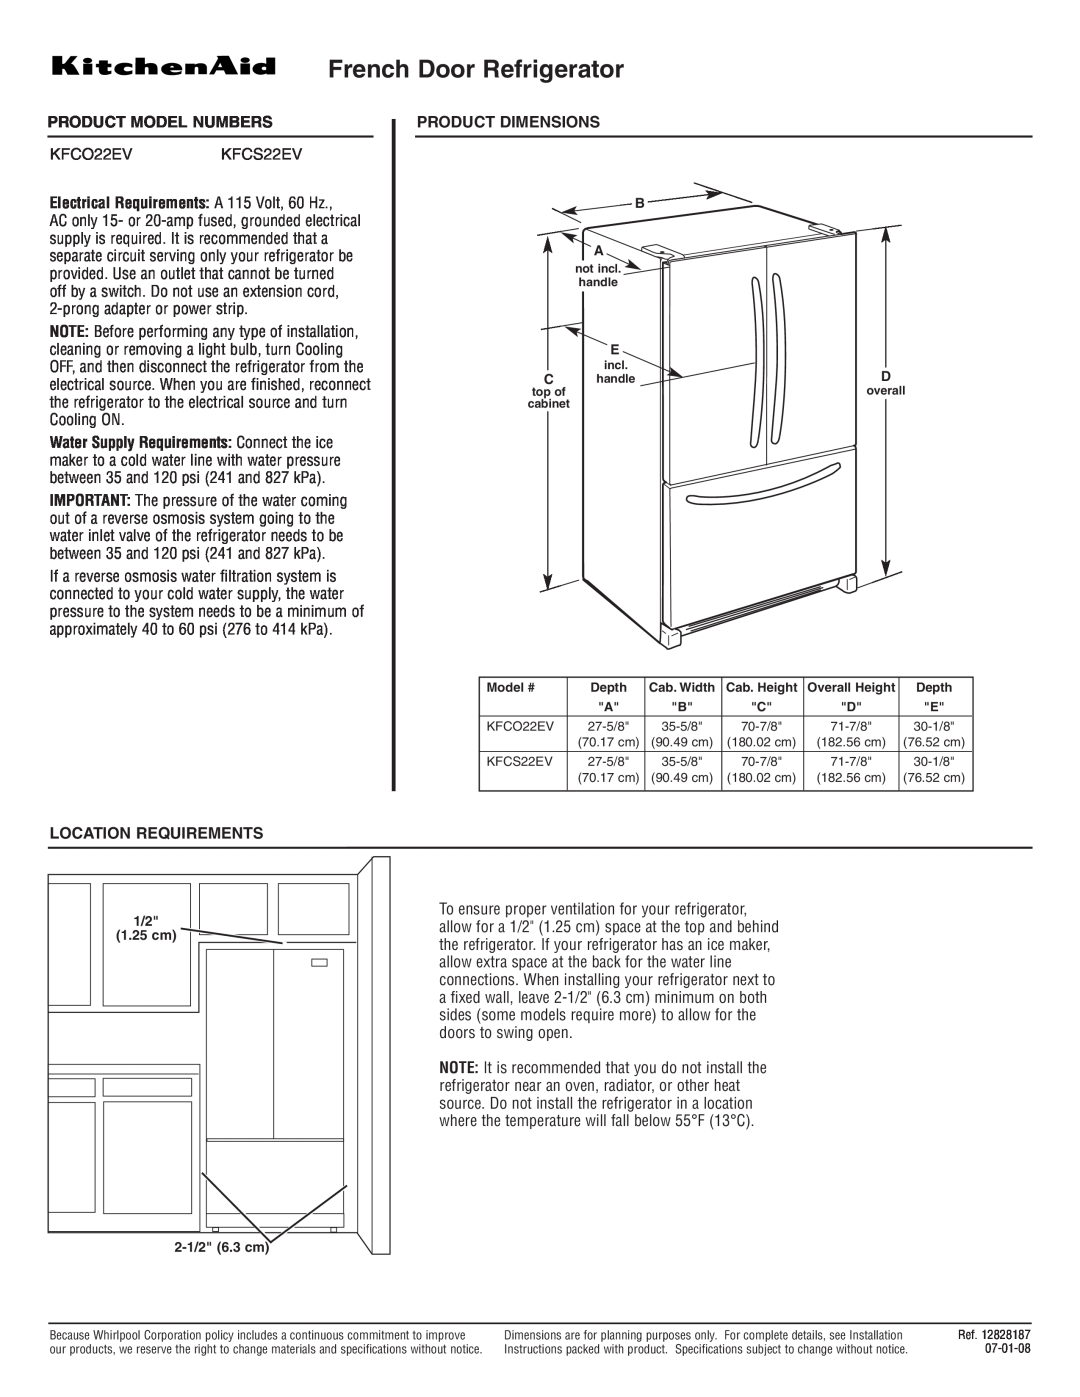 KitchenAid dimensions French Door Refrigerator, Product Model Numbers, KFCO22EVKFCS22EV, Product Dimensions 